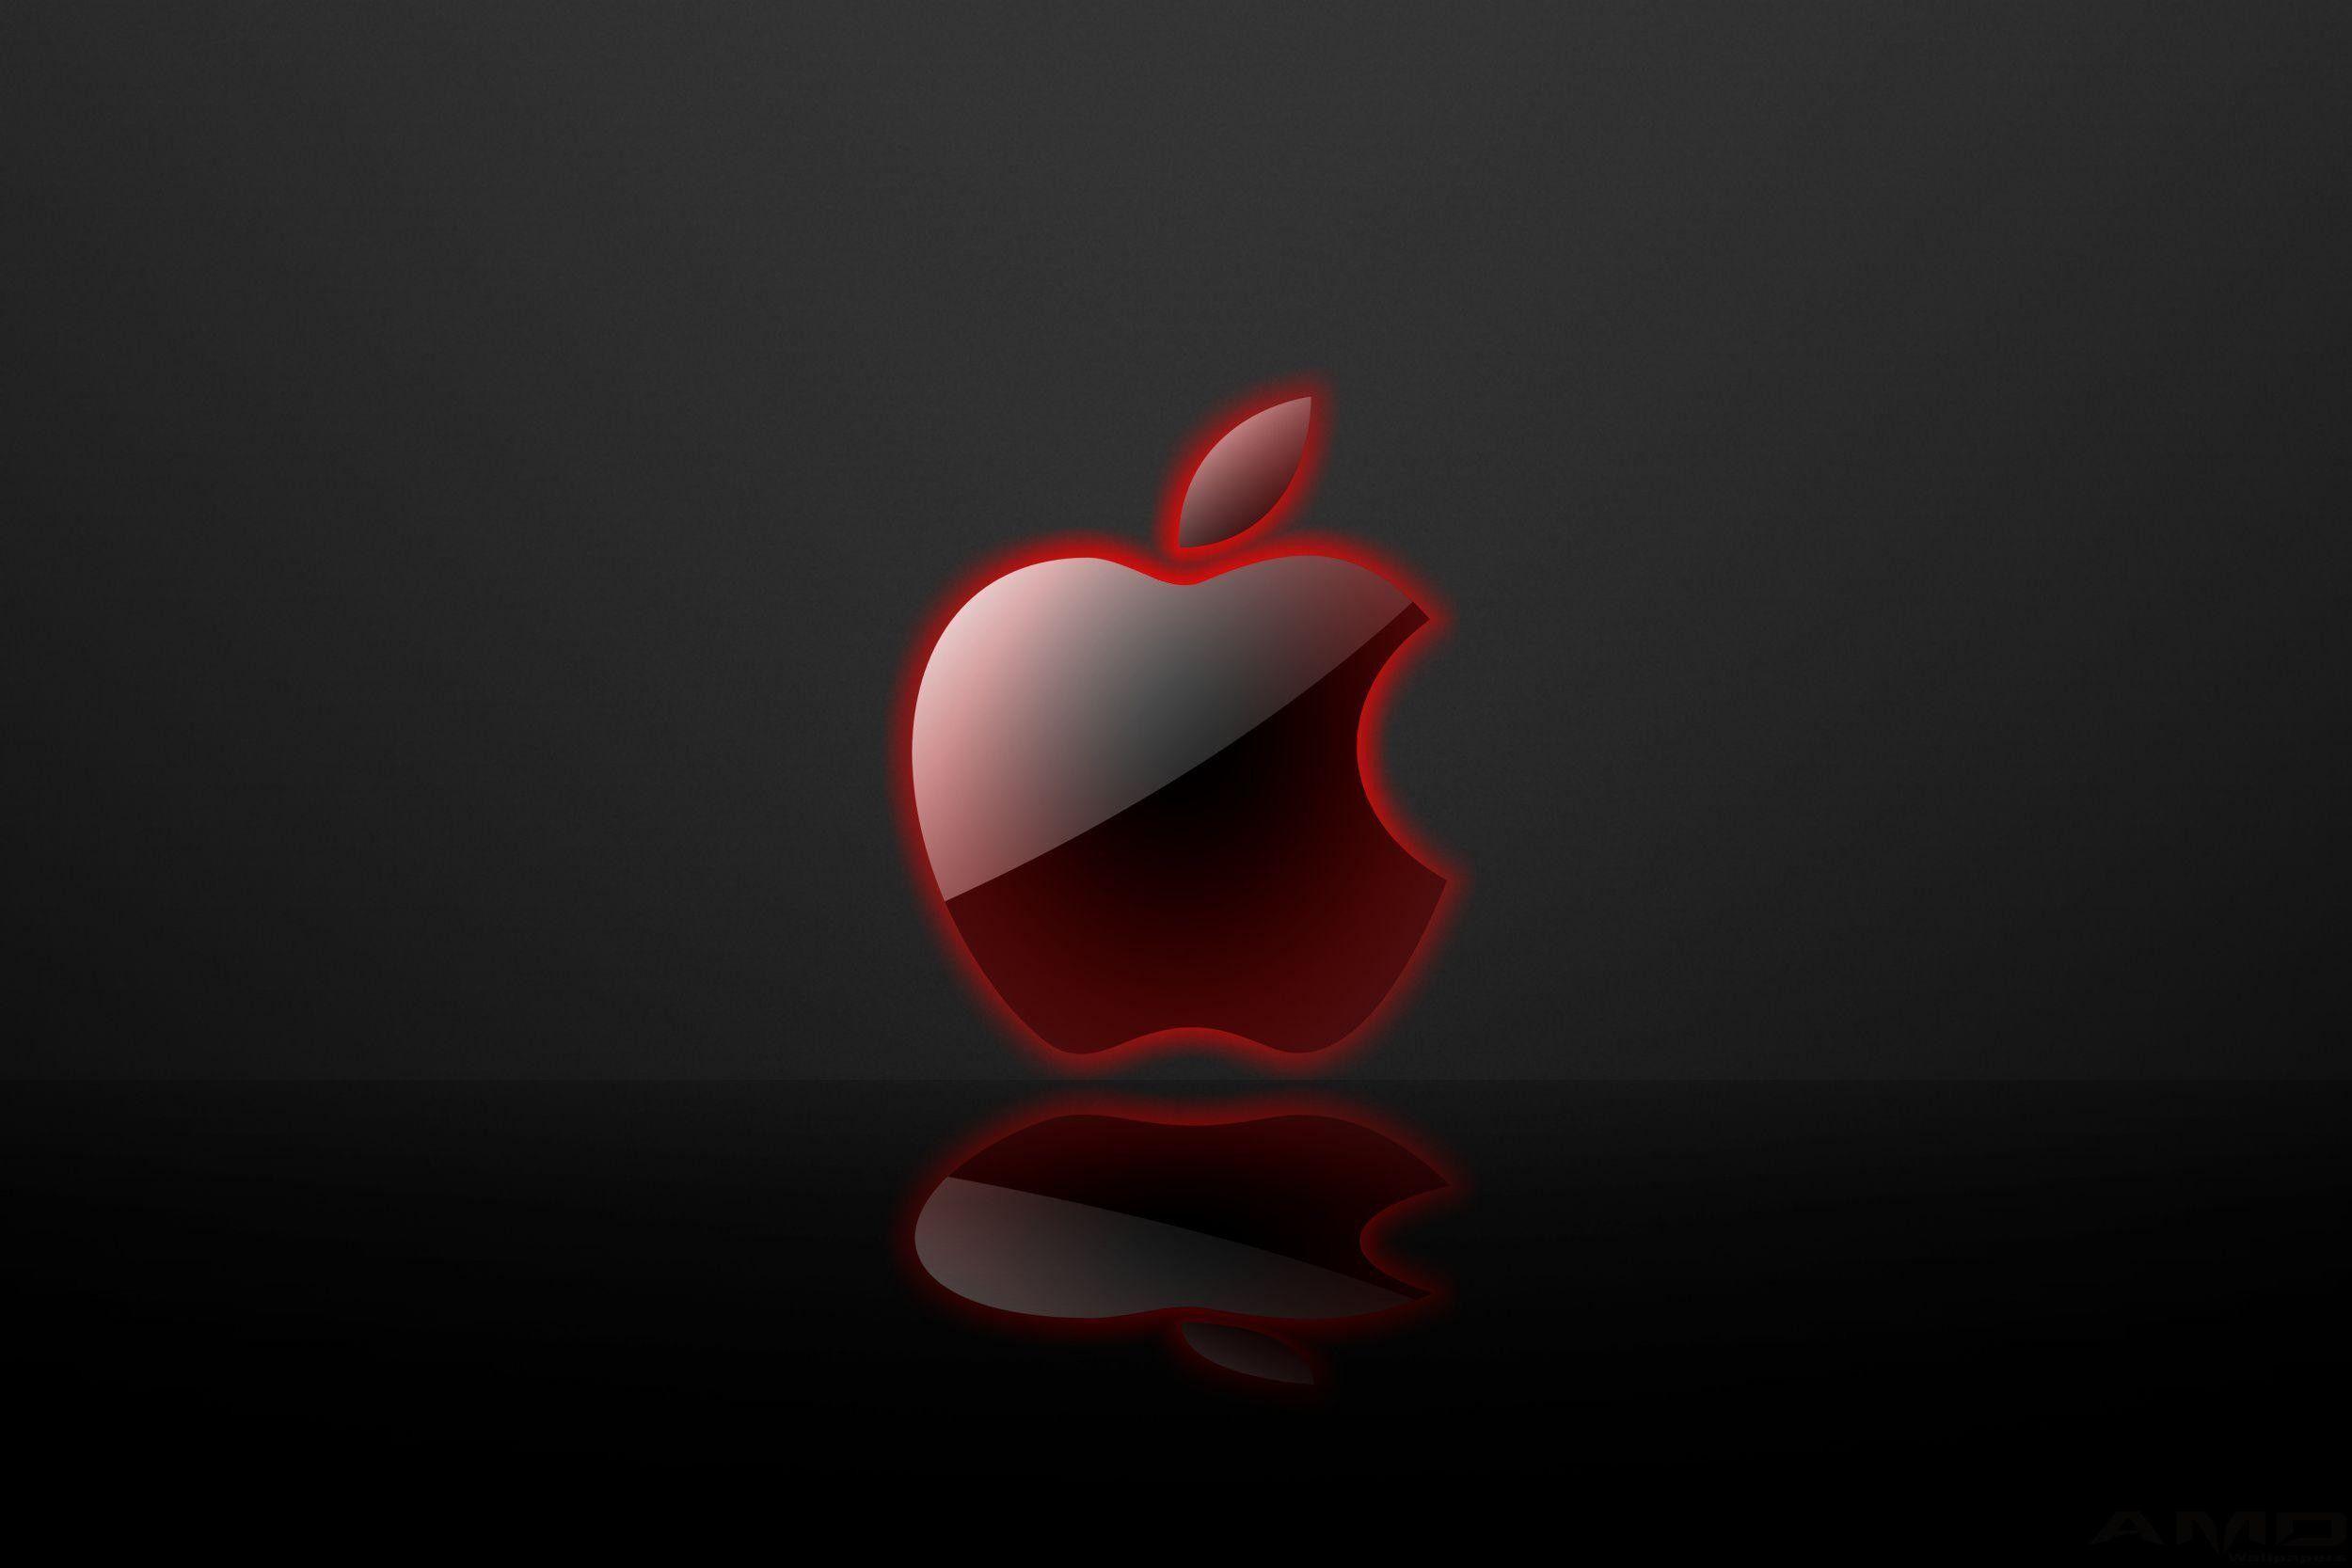 Red Apple Wallpapers - Top Free Red Apple Backgrounds - WallpaperAccess